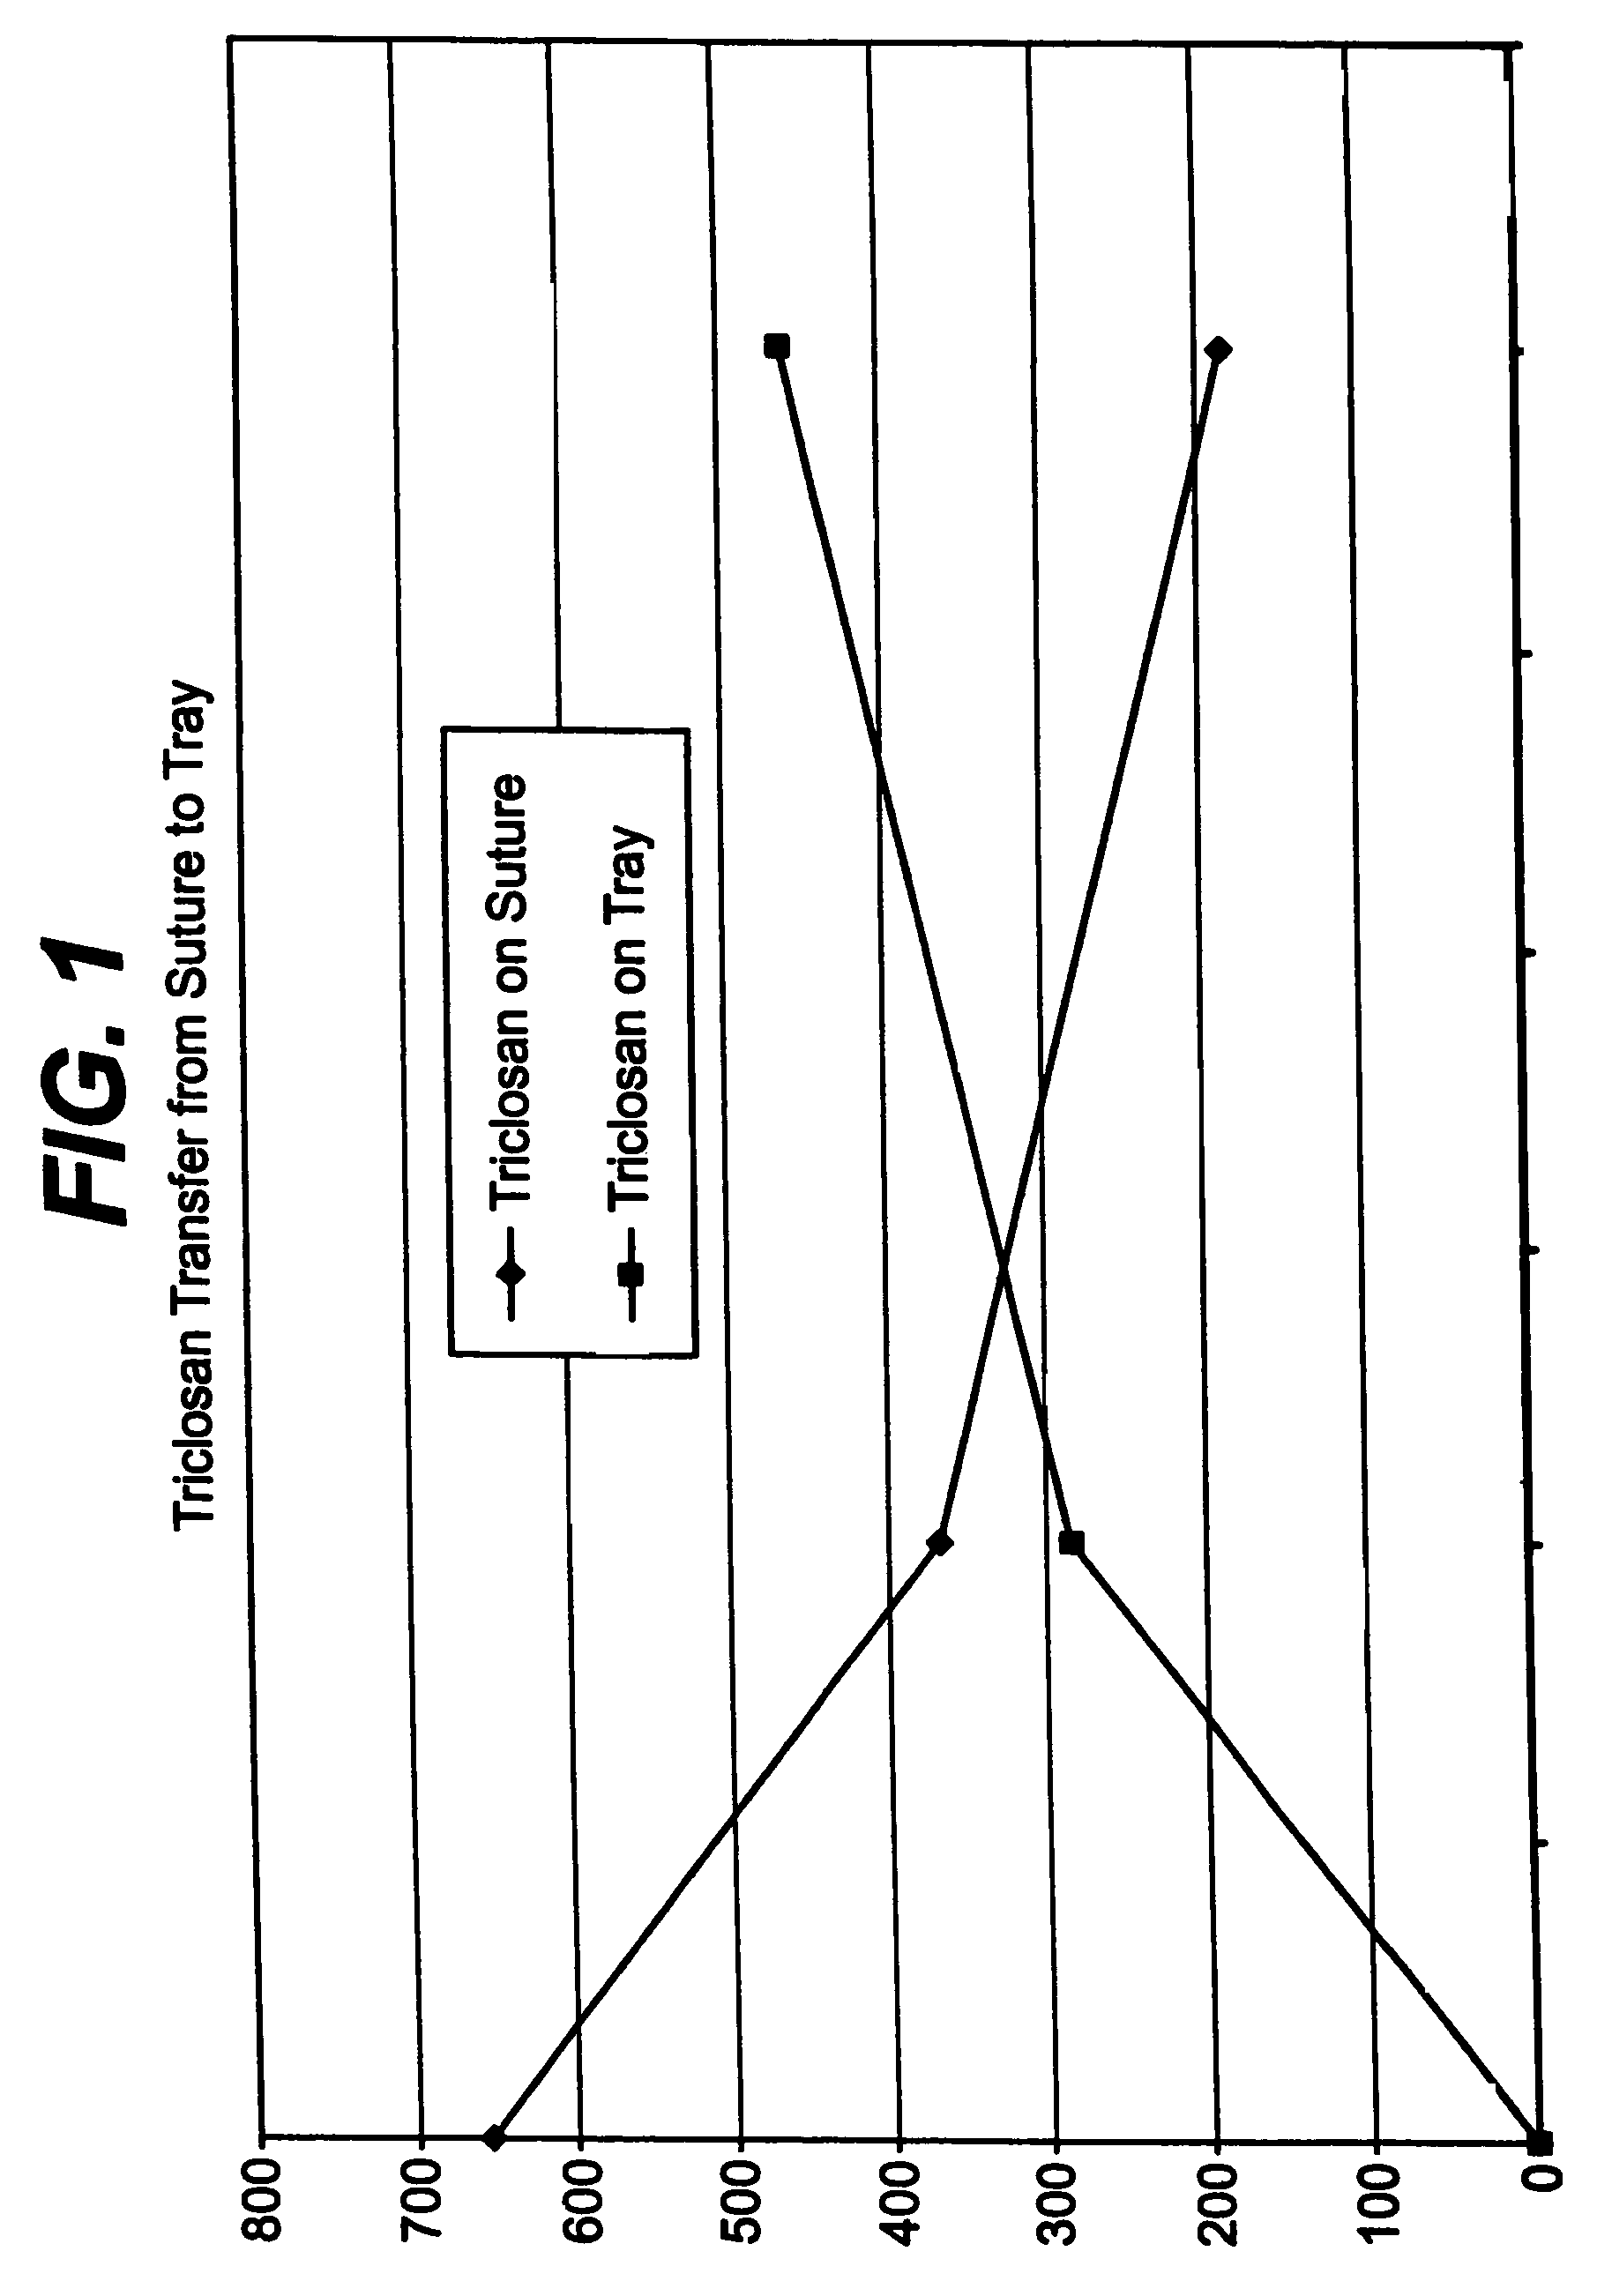 Method of preparing an antimicrobial packaged medical device